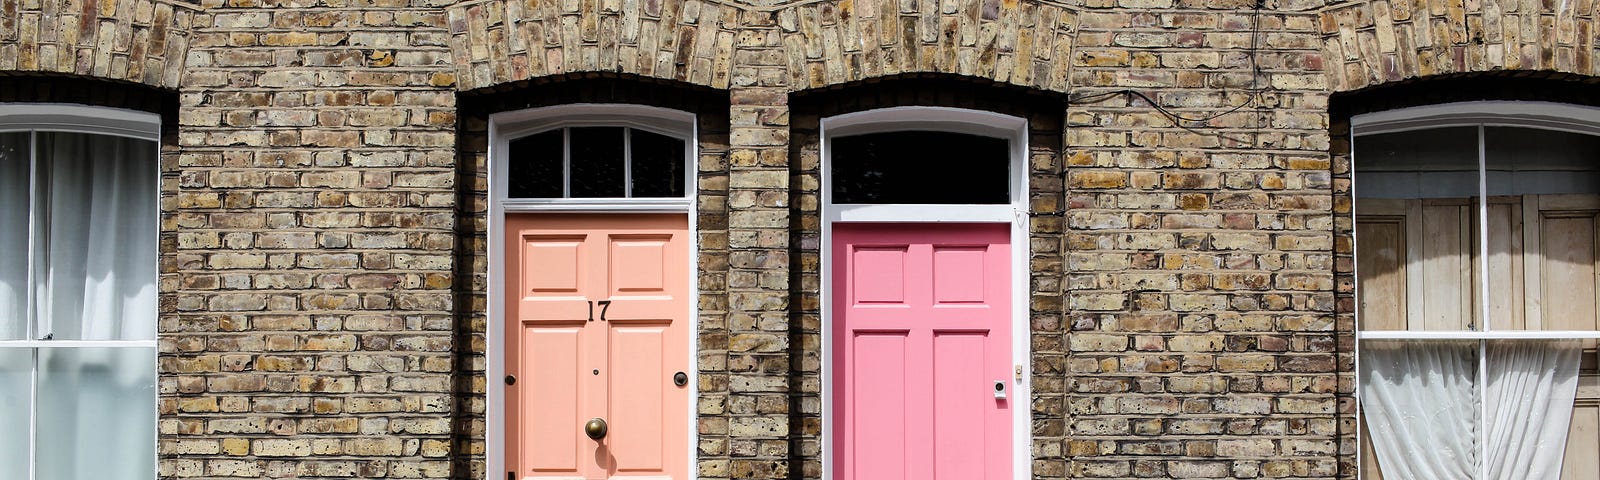 Two doors taken at Columbia Rd. One is beige and the other one is light pink.